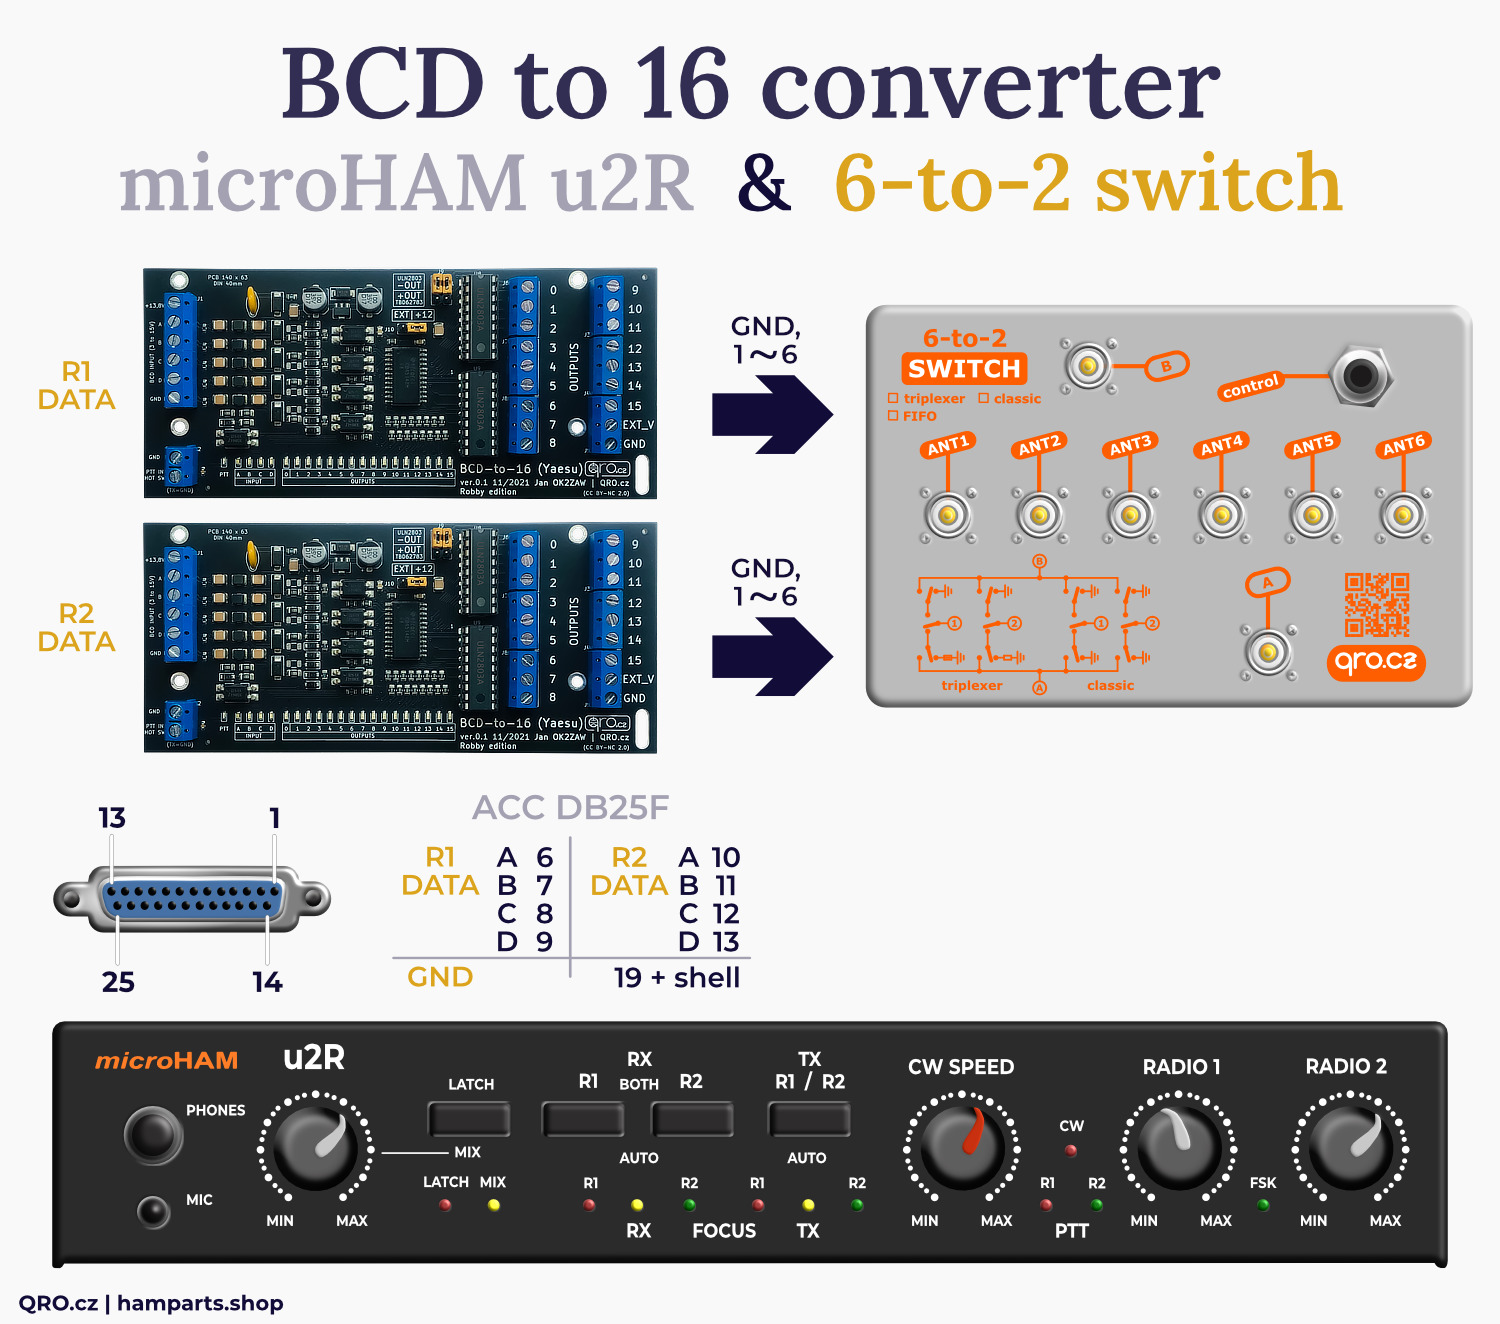 BCD to 16 version converter with 6 to 2 antenna switch by qro.cz hamparts.shop